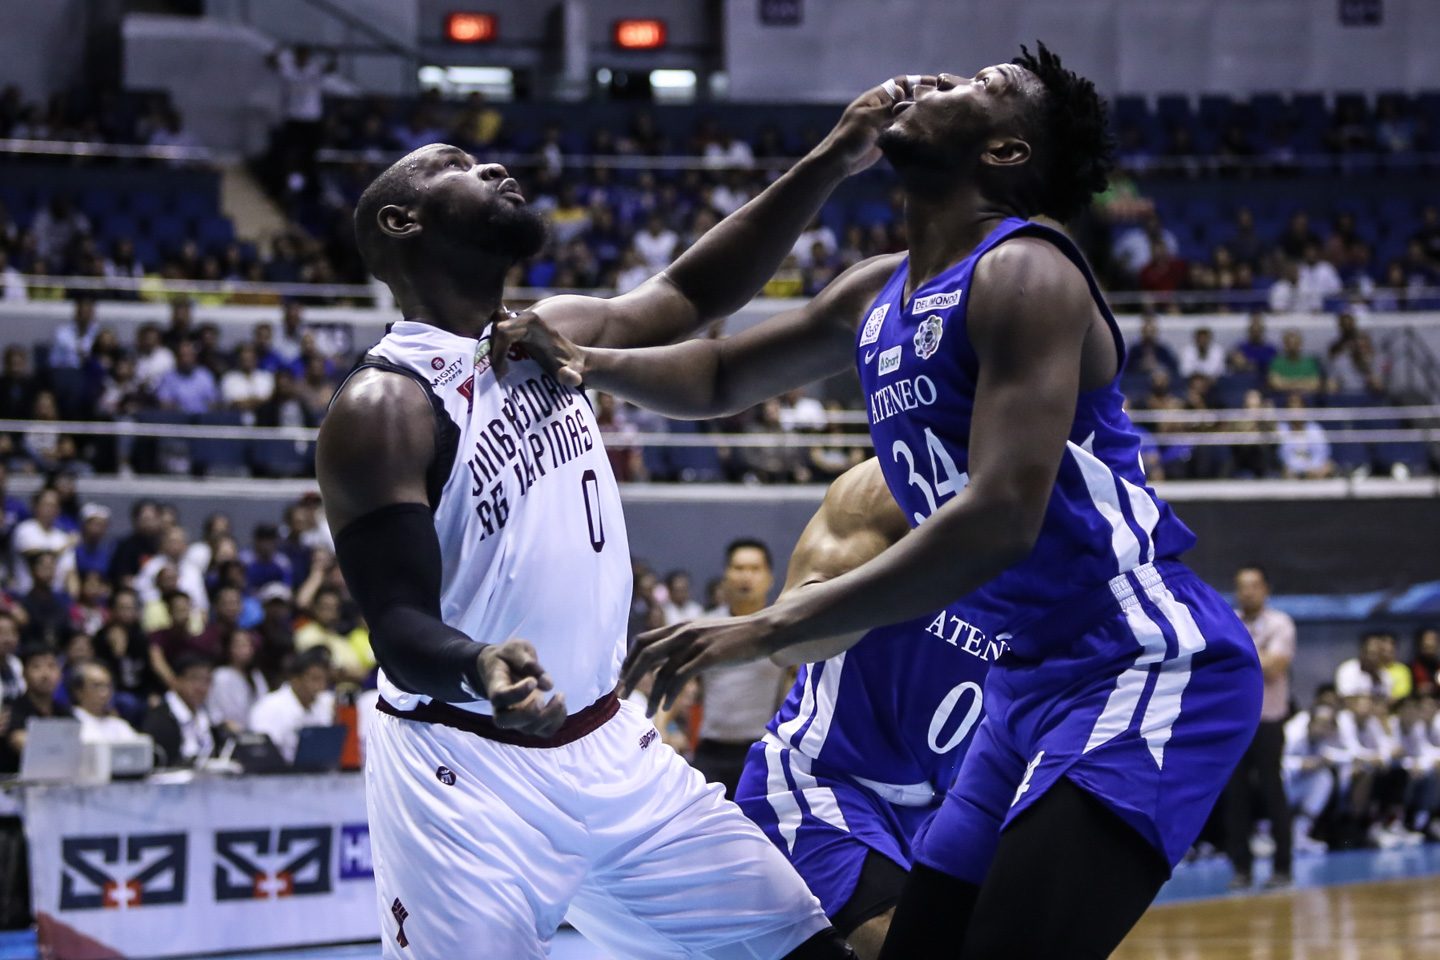 Ateneo turns back gutsy UP, picks up first victory